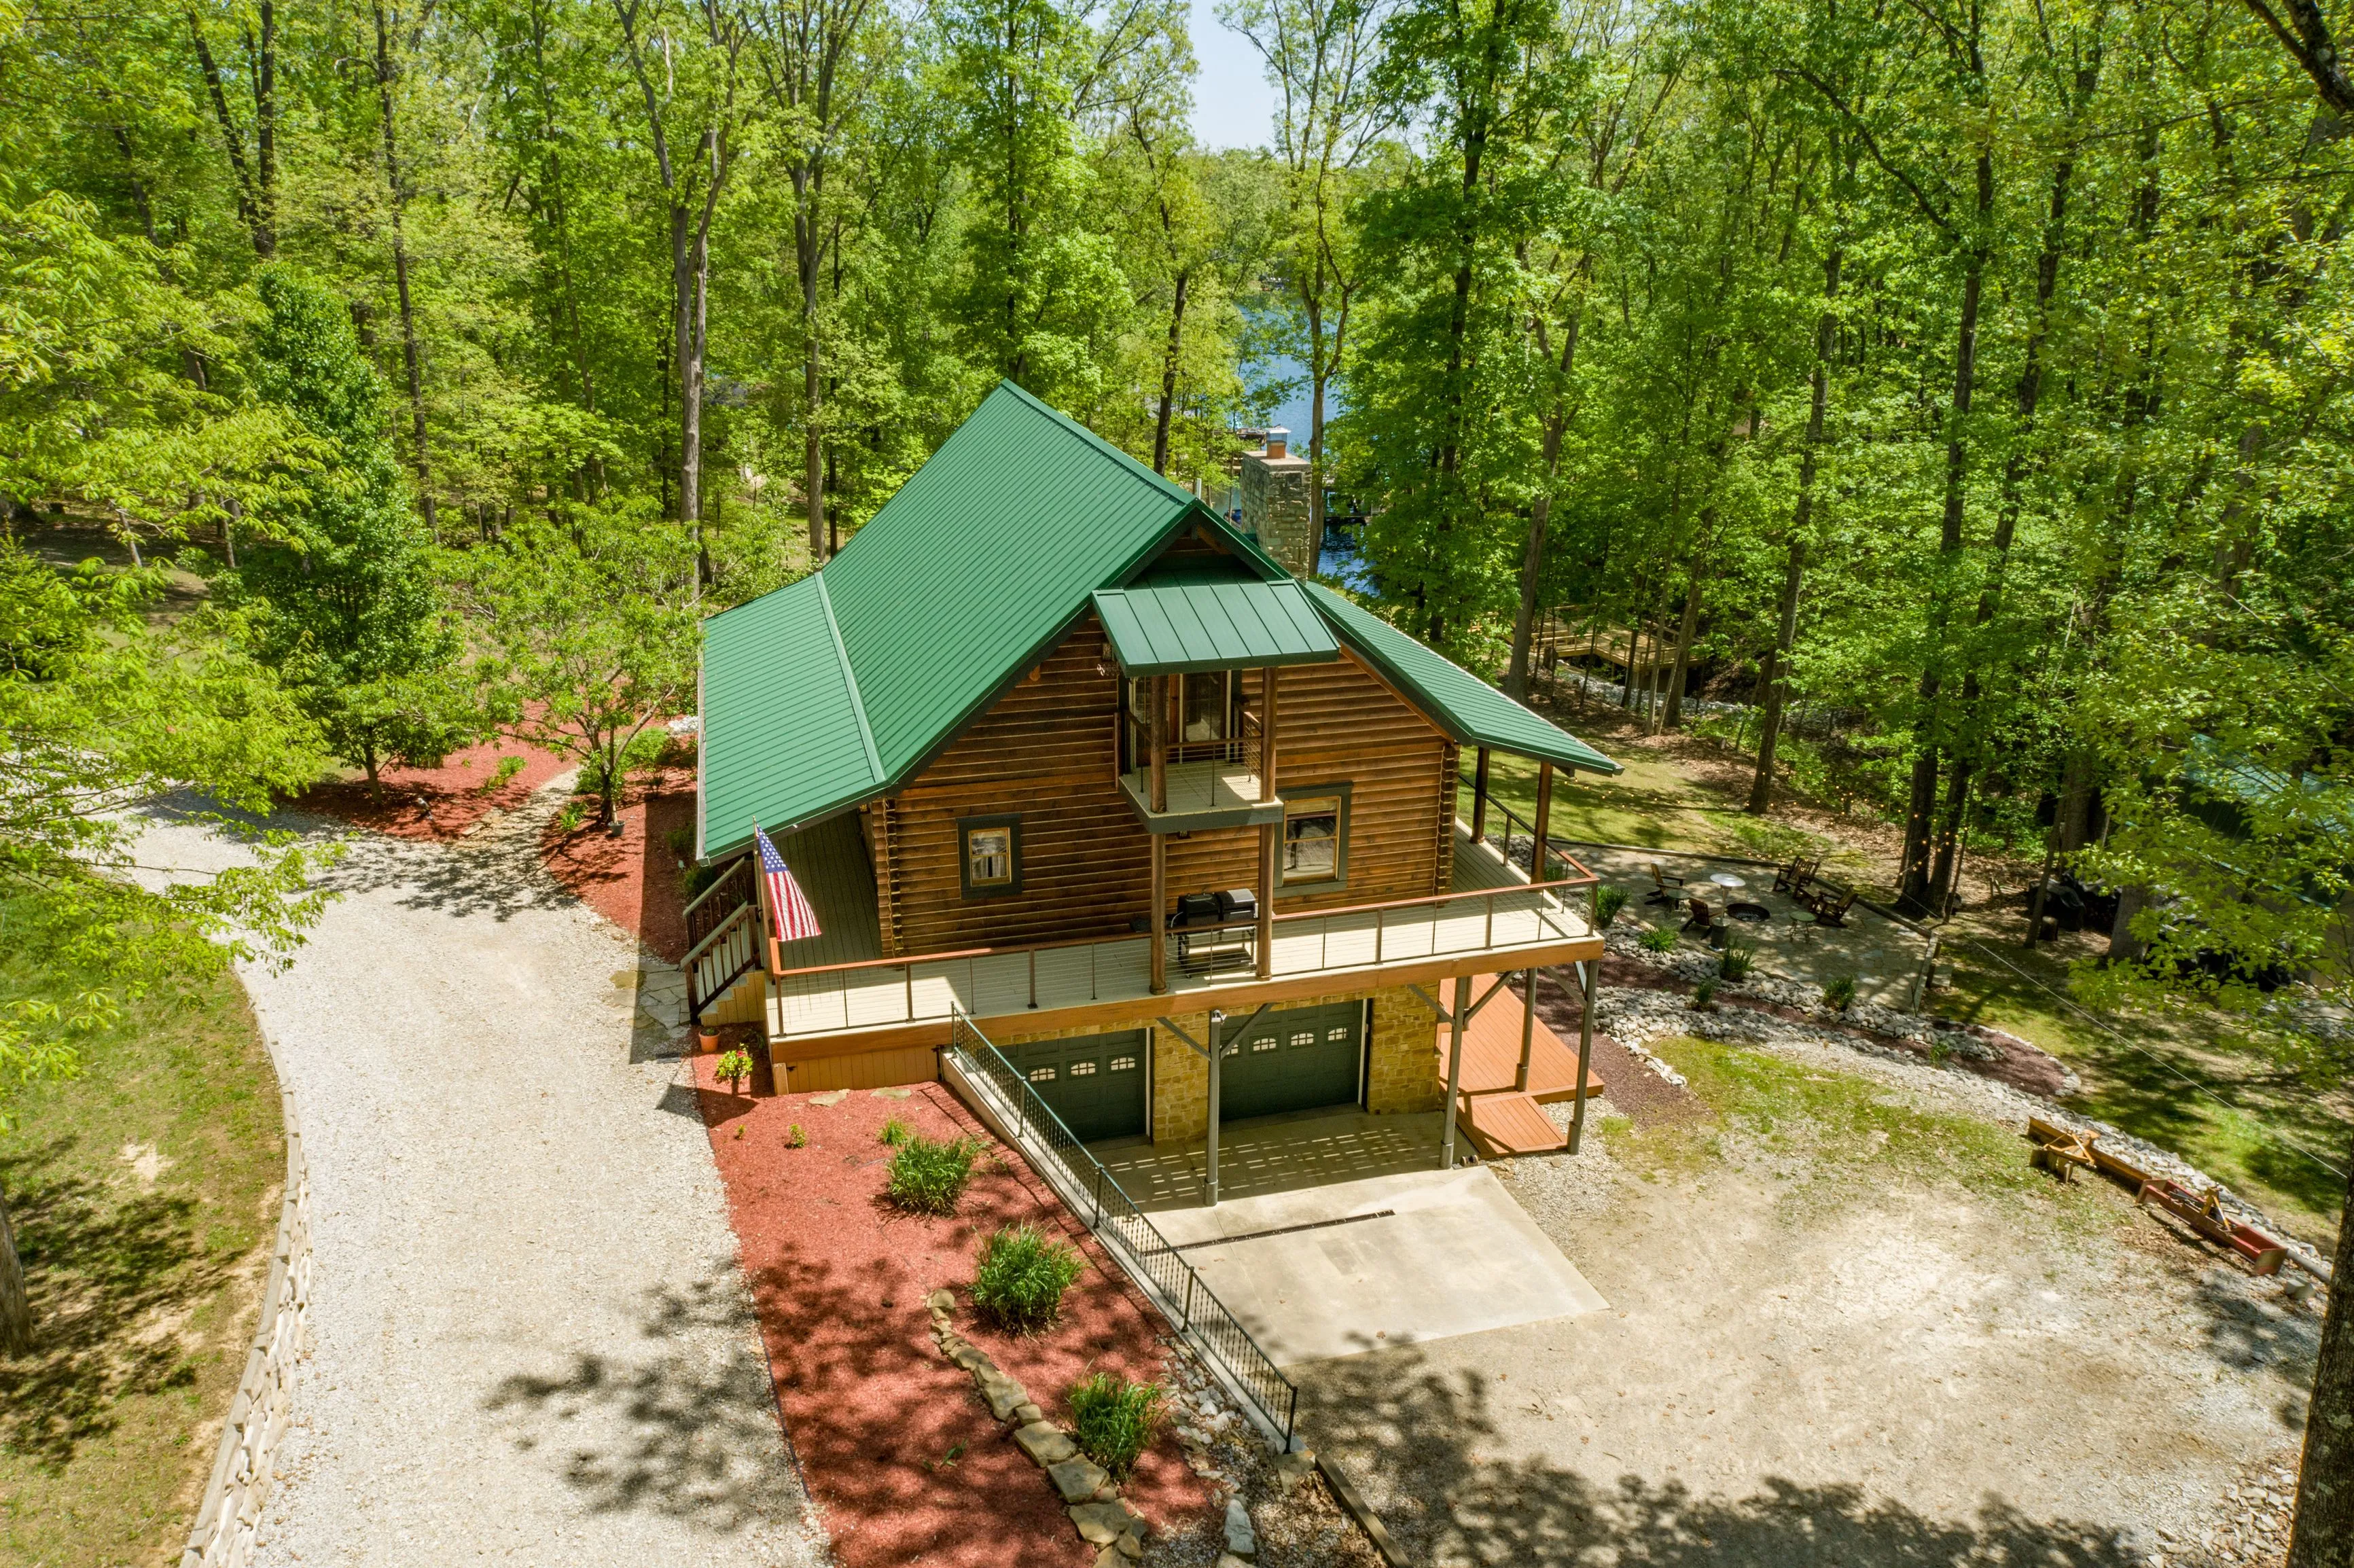 Aerial view of a secluded cabin with a green roof surrounded by lush green trees with a gravel driveway.